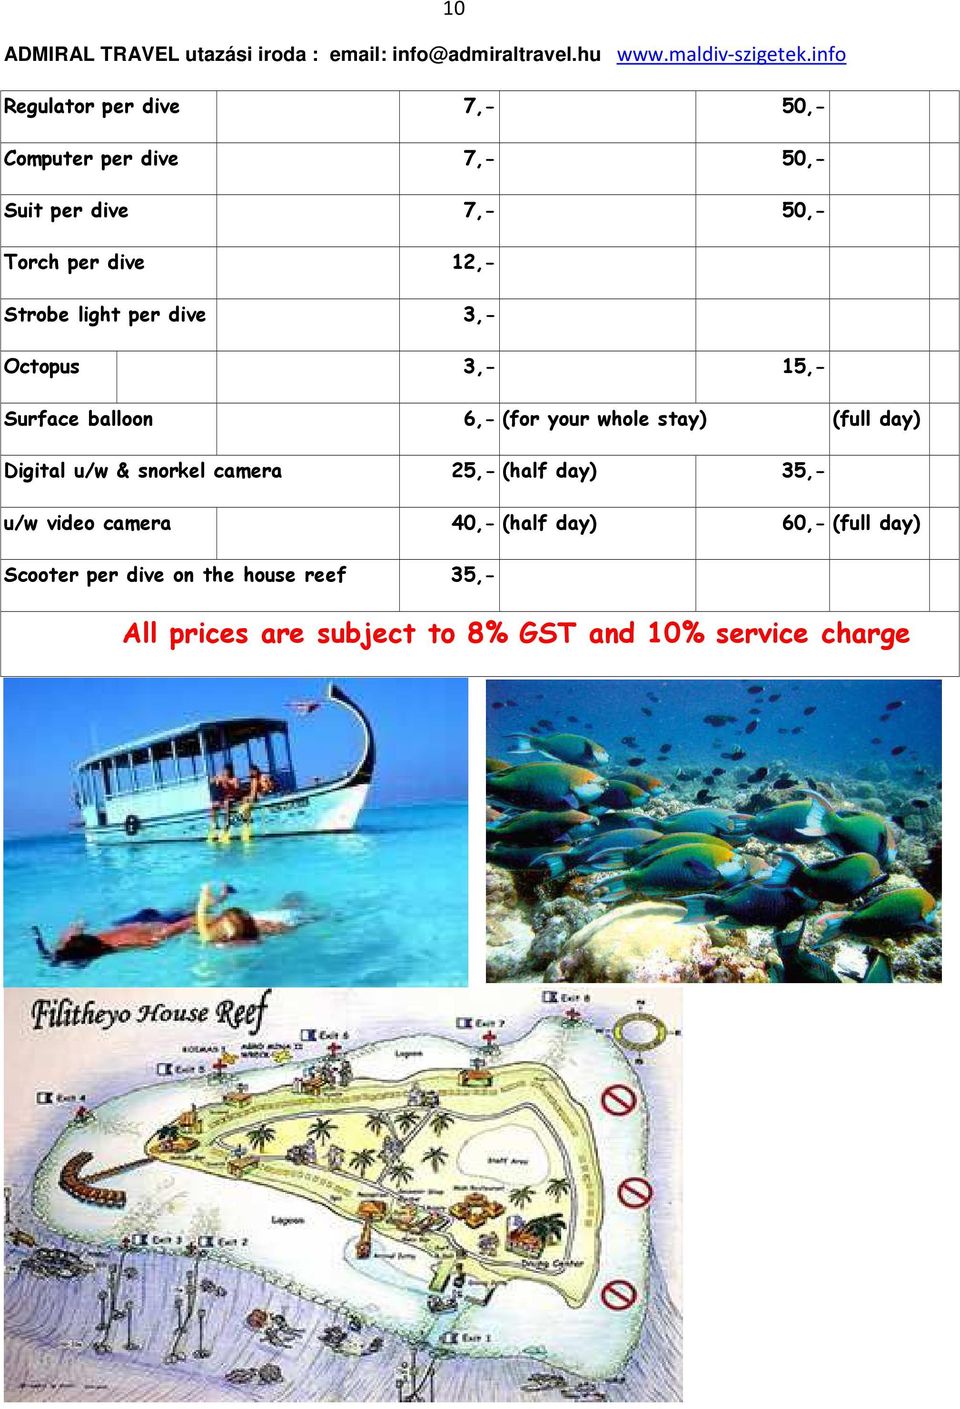 per dive 3,- Octopus 3,- 15,- Surface balloon 6,- (for your whole stay) (full day) Digital u/w & snorkel camera 25,-